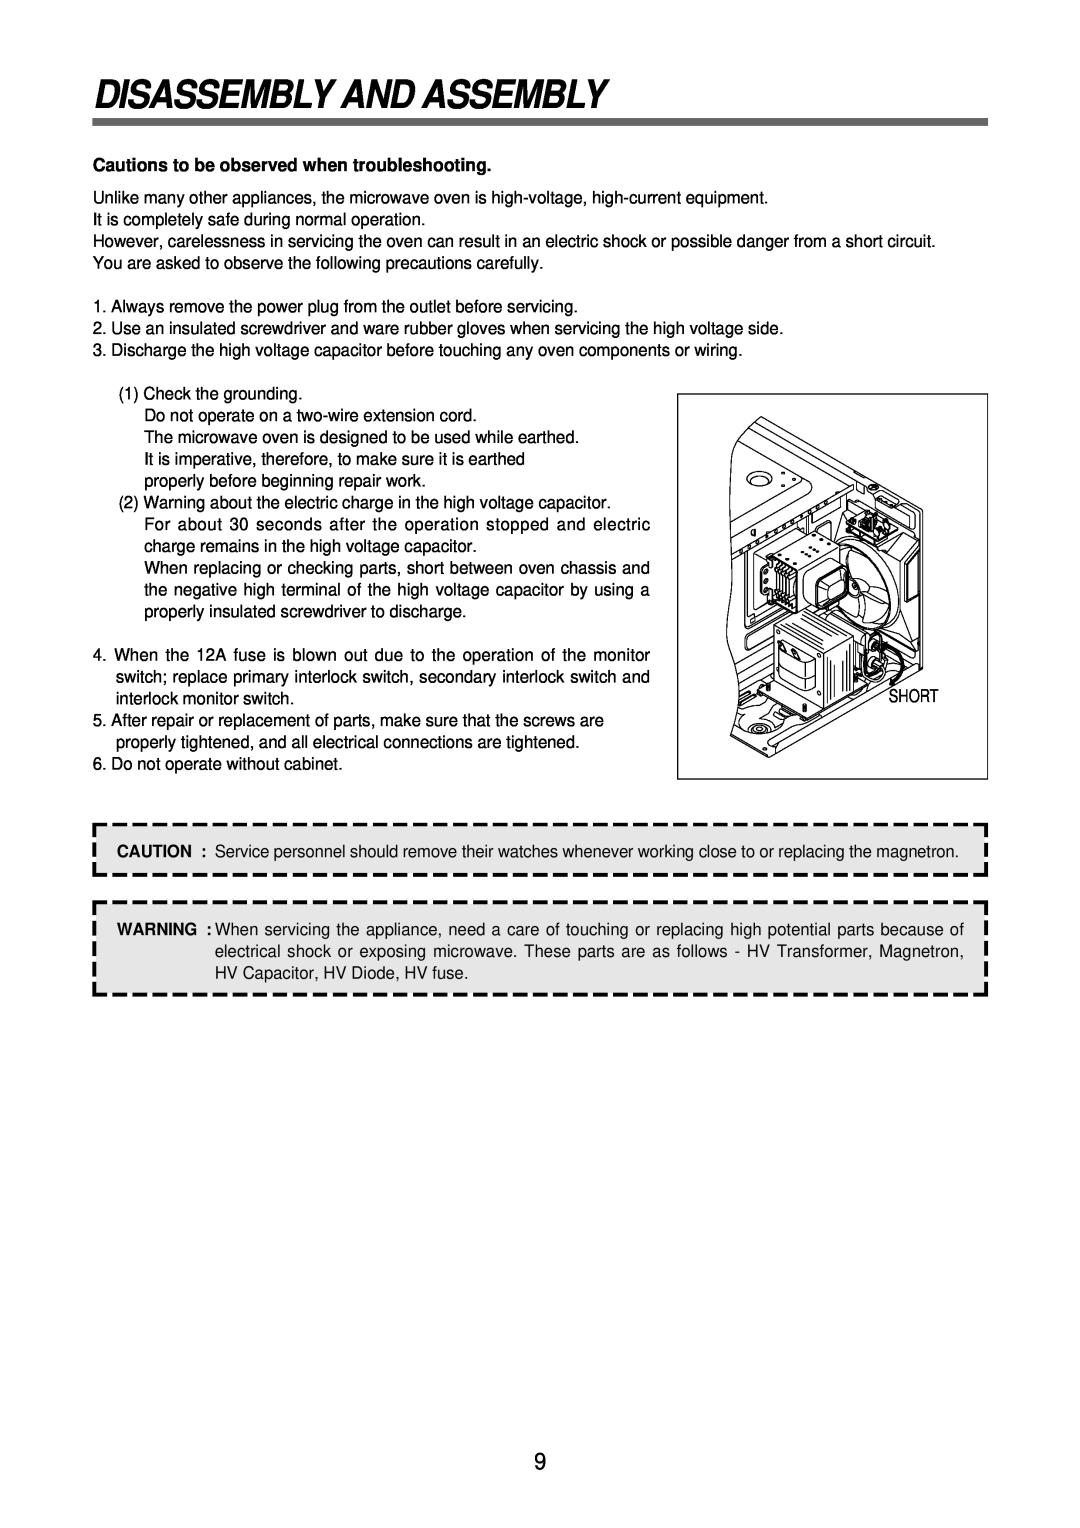 Daewoo KOR-6Q2B5S service manual Disassembly And Assembly, Cautions to be observed when troubleshooting 